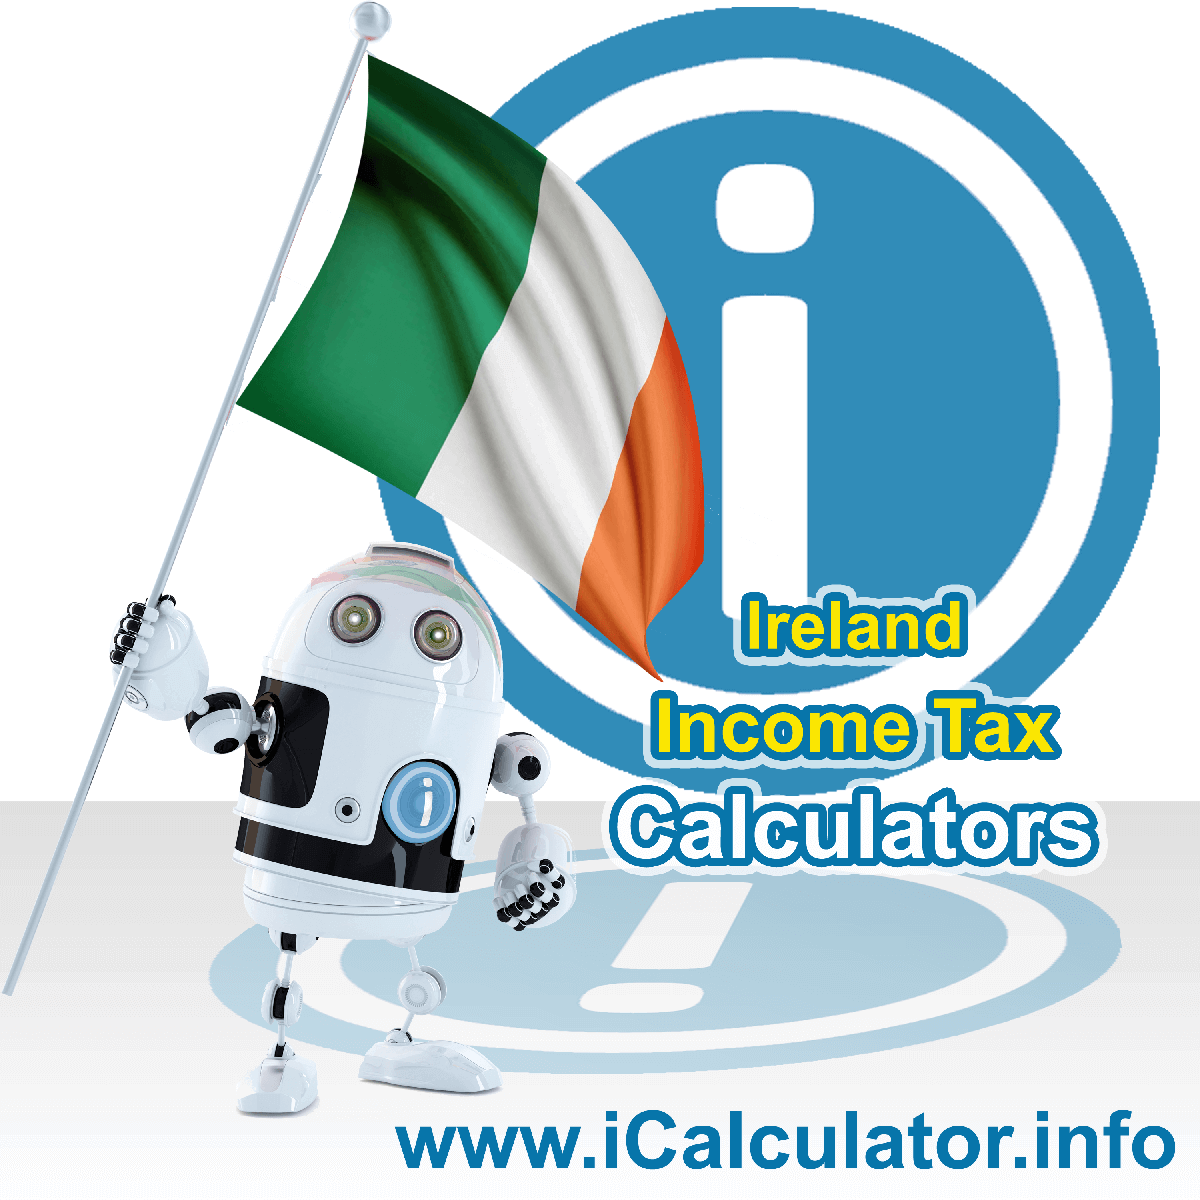 Ireland Income Tax Calculator. This image shows a new employer in Ireland calculating the annual payroll costs based on multiple payroll payments in one year in Ireland using the Ireland income tax calculator to understand their payroll costs in Ireland in 2023